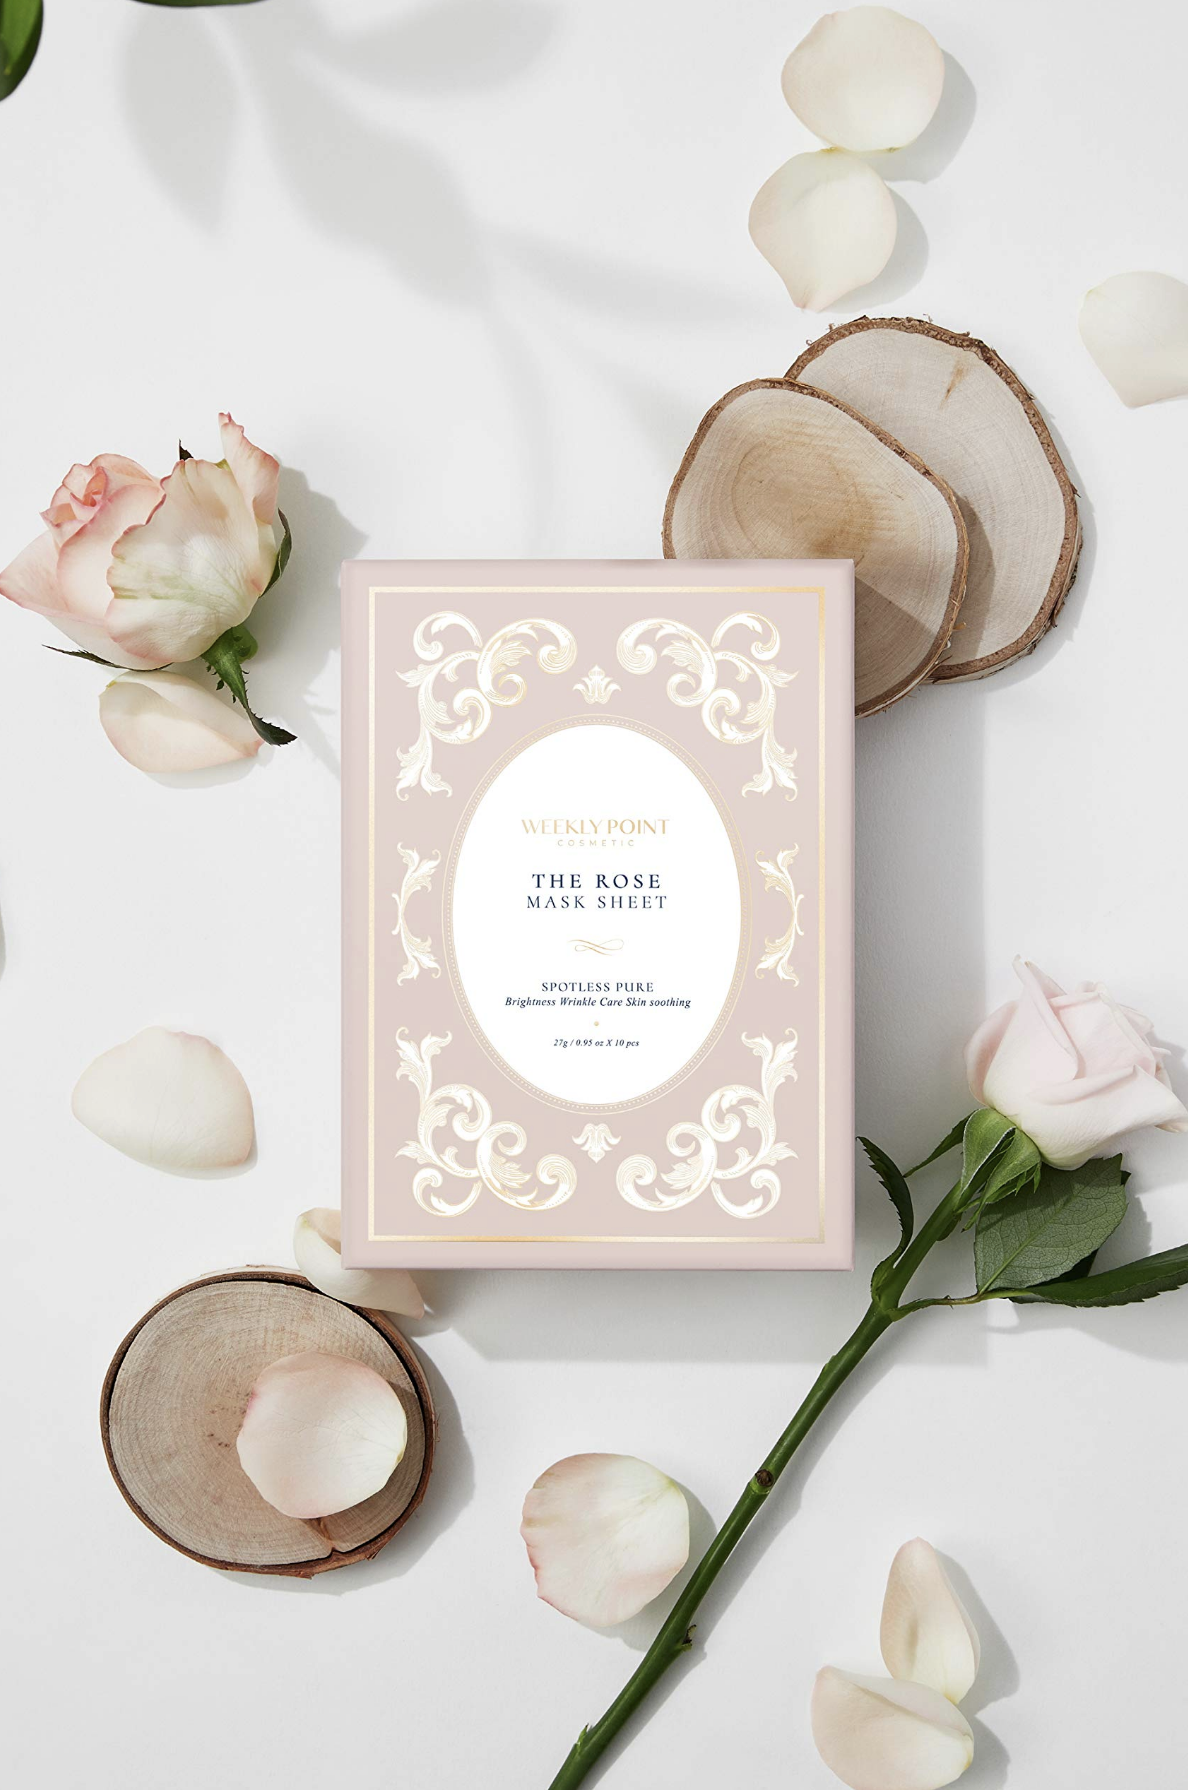 Weekly Point	The Rose Mask Sheet - 1 Box of 10 Sheets